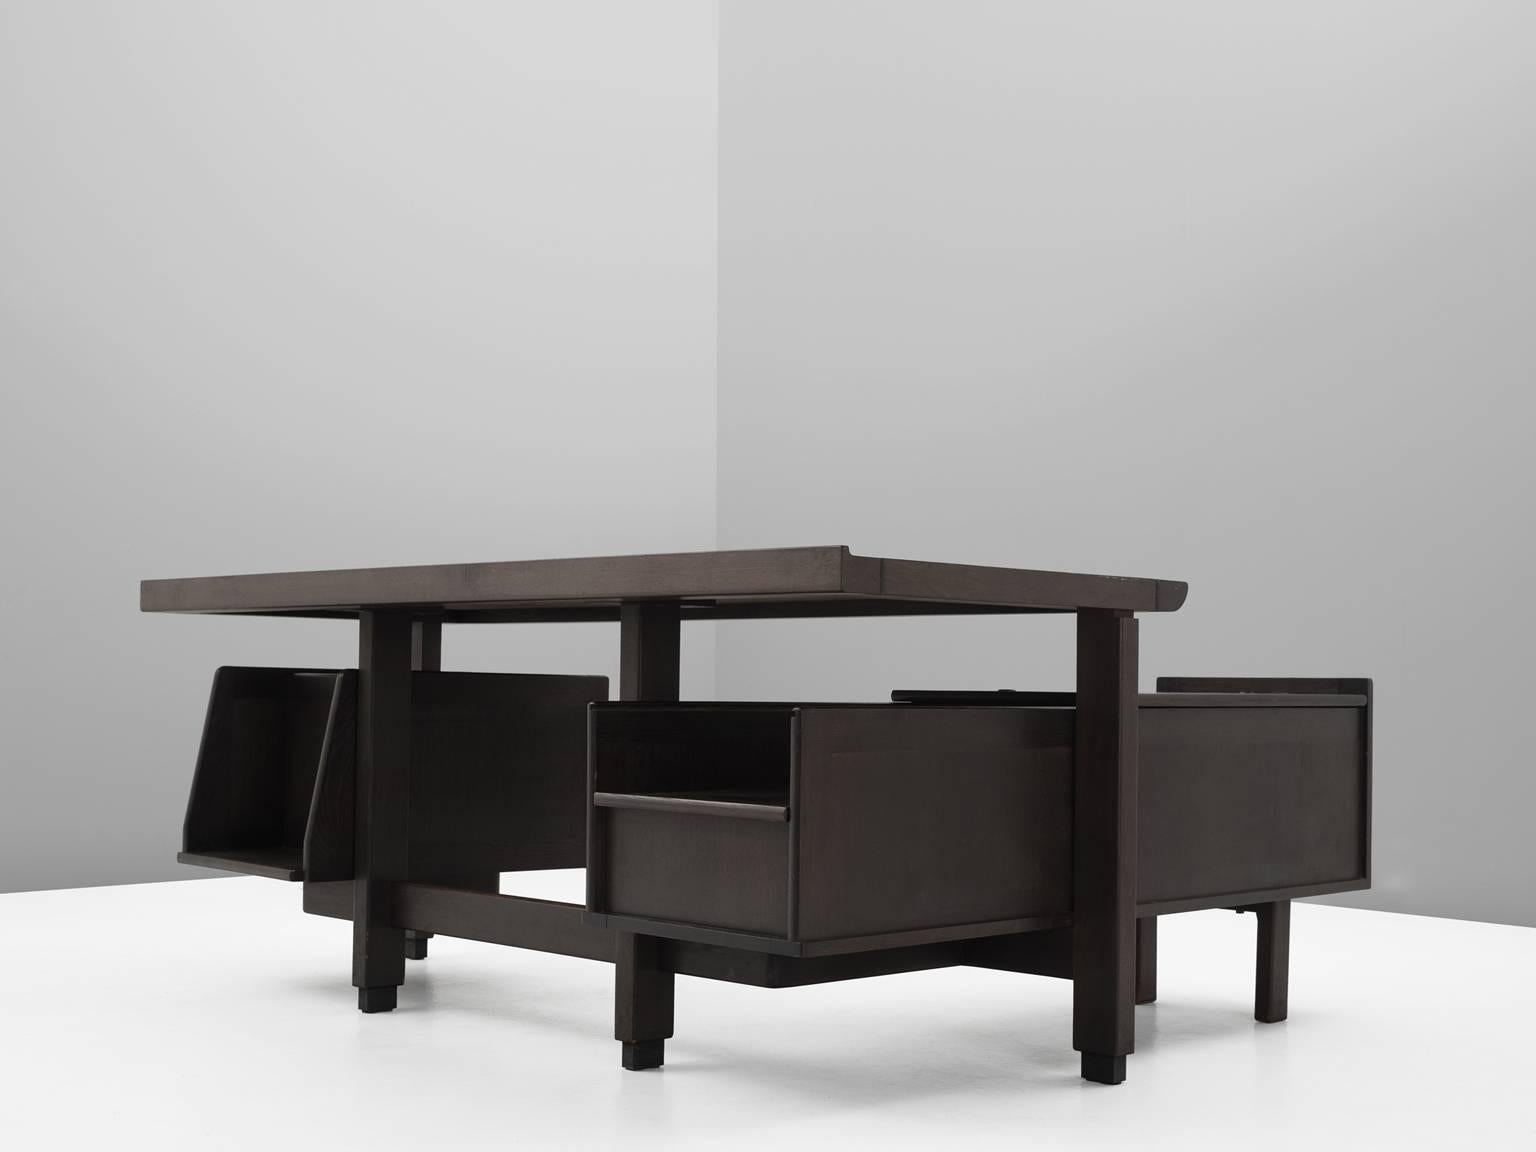 French Guillerme & Chambron Executive Desk in Dark Stained Oak